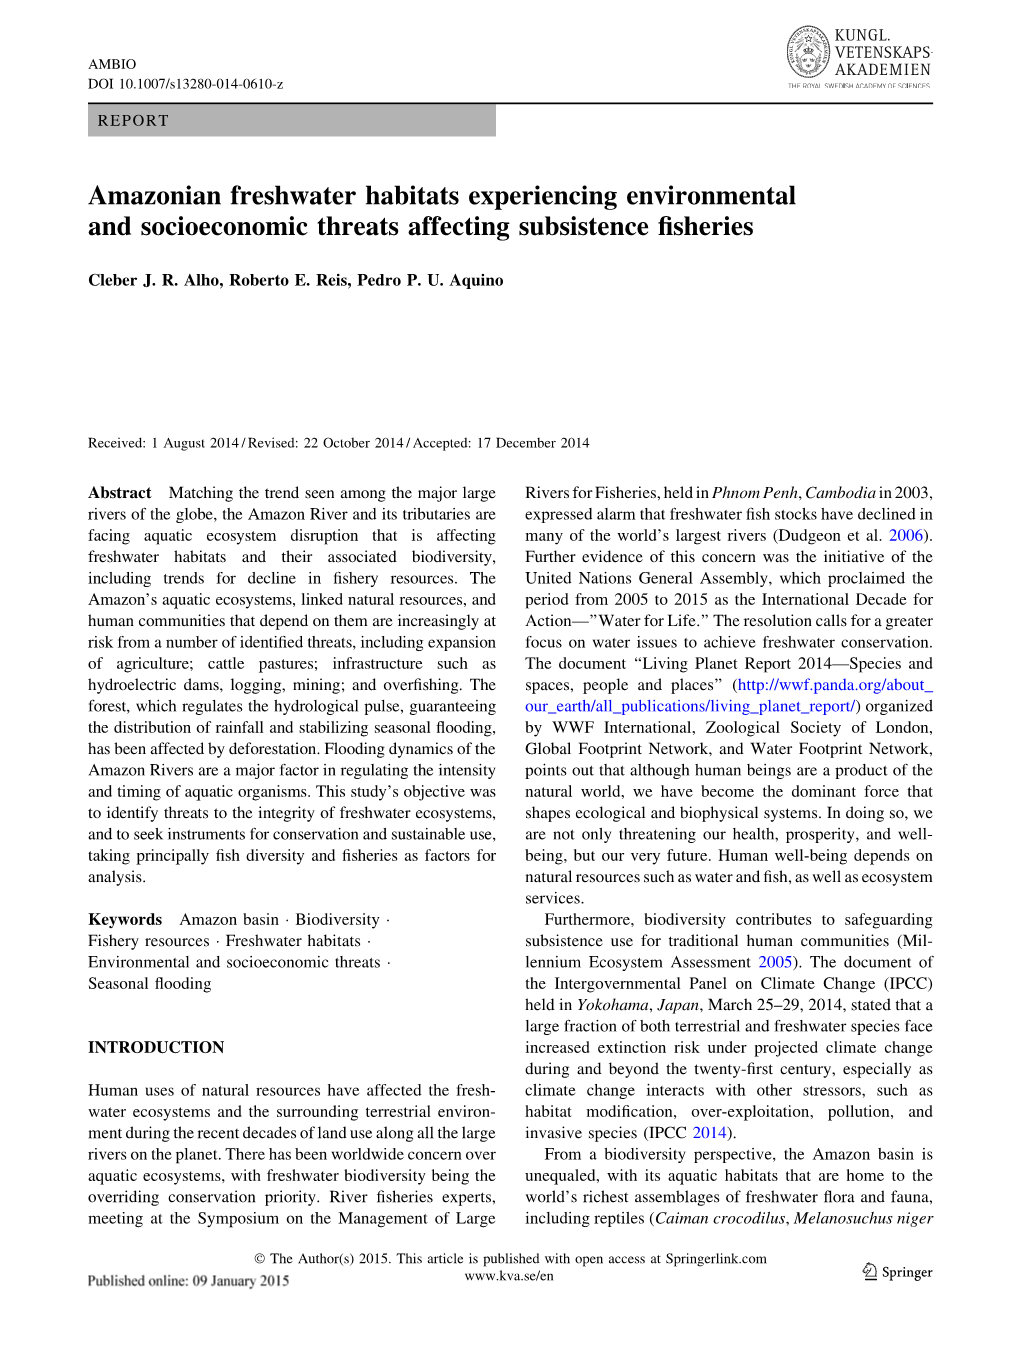 Amazonian Freshwater Habitats Experiencing Environmental and Socioeconomic Threats Affecting Subsistence ﬁsheries